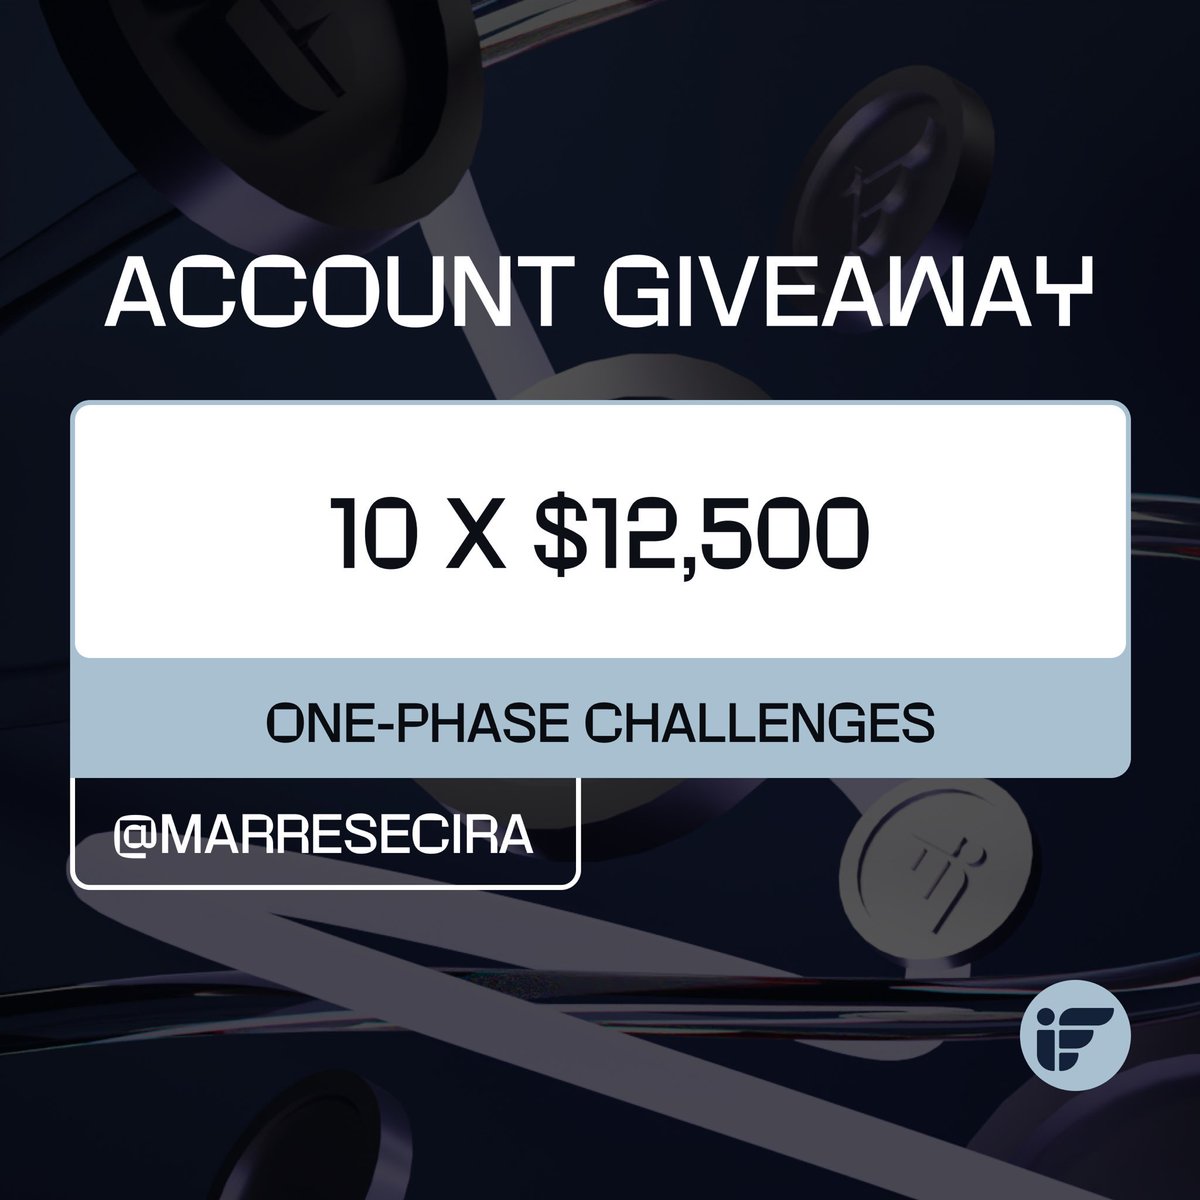 125k$ GIVEAWAY 🔥 10 x $12,500 One phase Challenge Accounts Giveaway to any random follower🔥 To WIN you must →Follow @Marresecira & @InstantFunding_ →Must Follow @SDX_Trades | @4x876 | @Sammypreneur_ | @frennadev →Like & Repost this Giveaway →Tag 3 friends in the comment